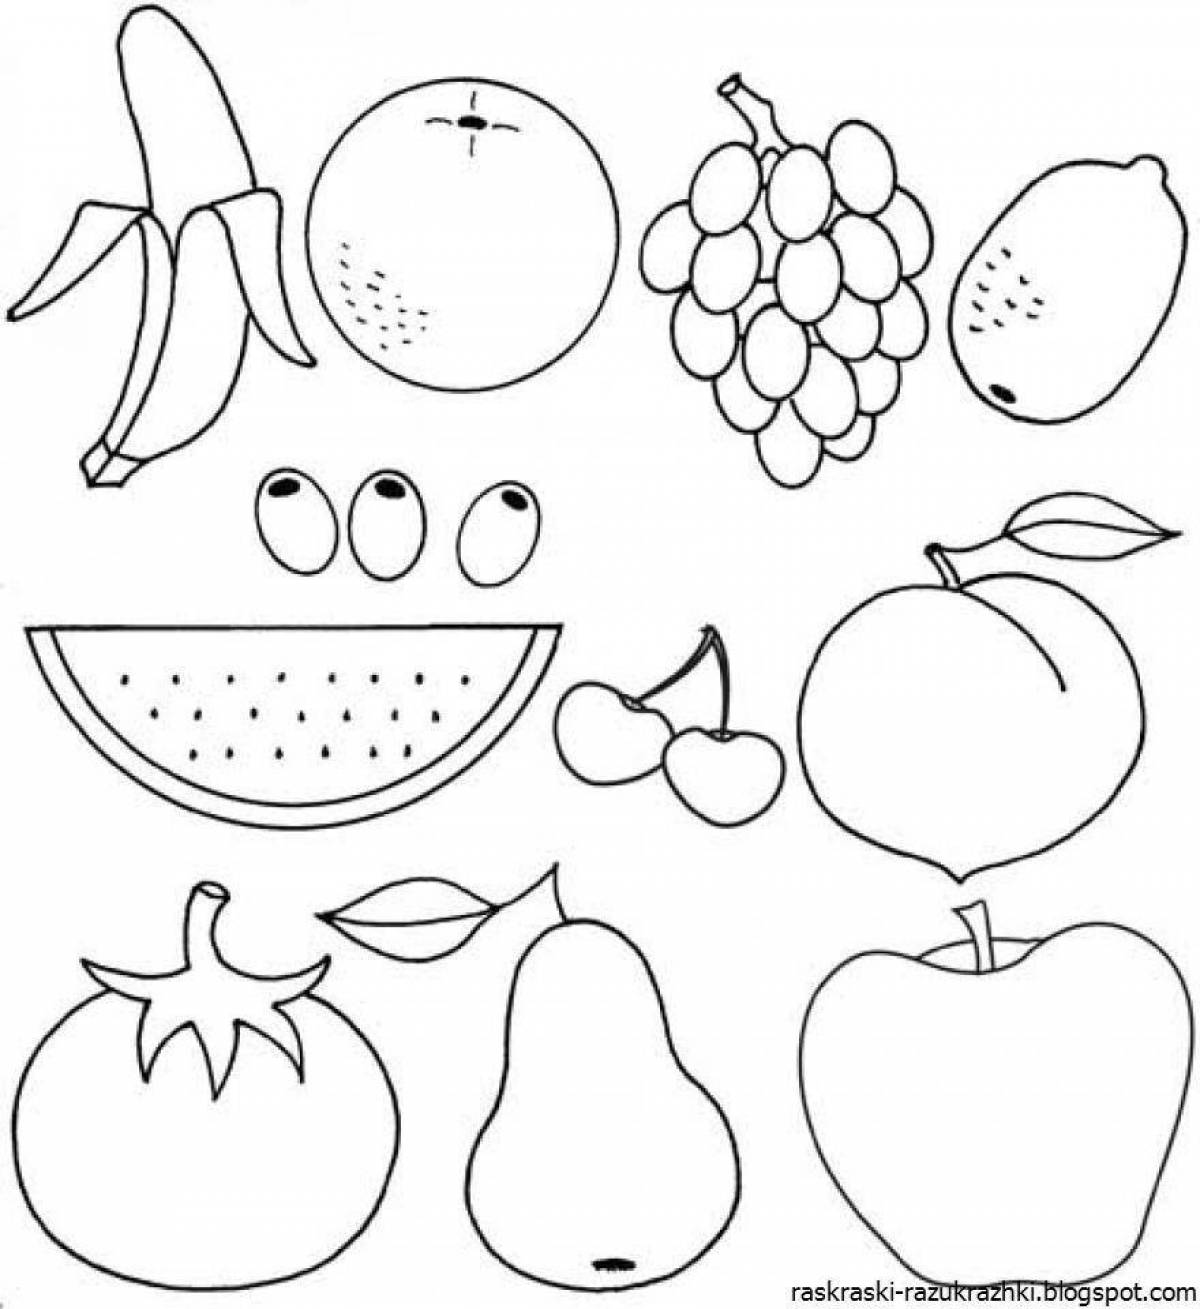 Magic fruits coloring book for children 6-7 years old